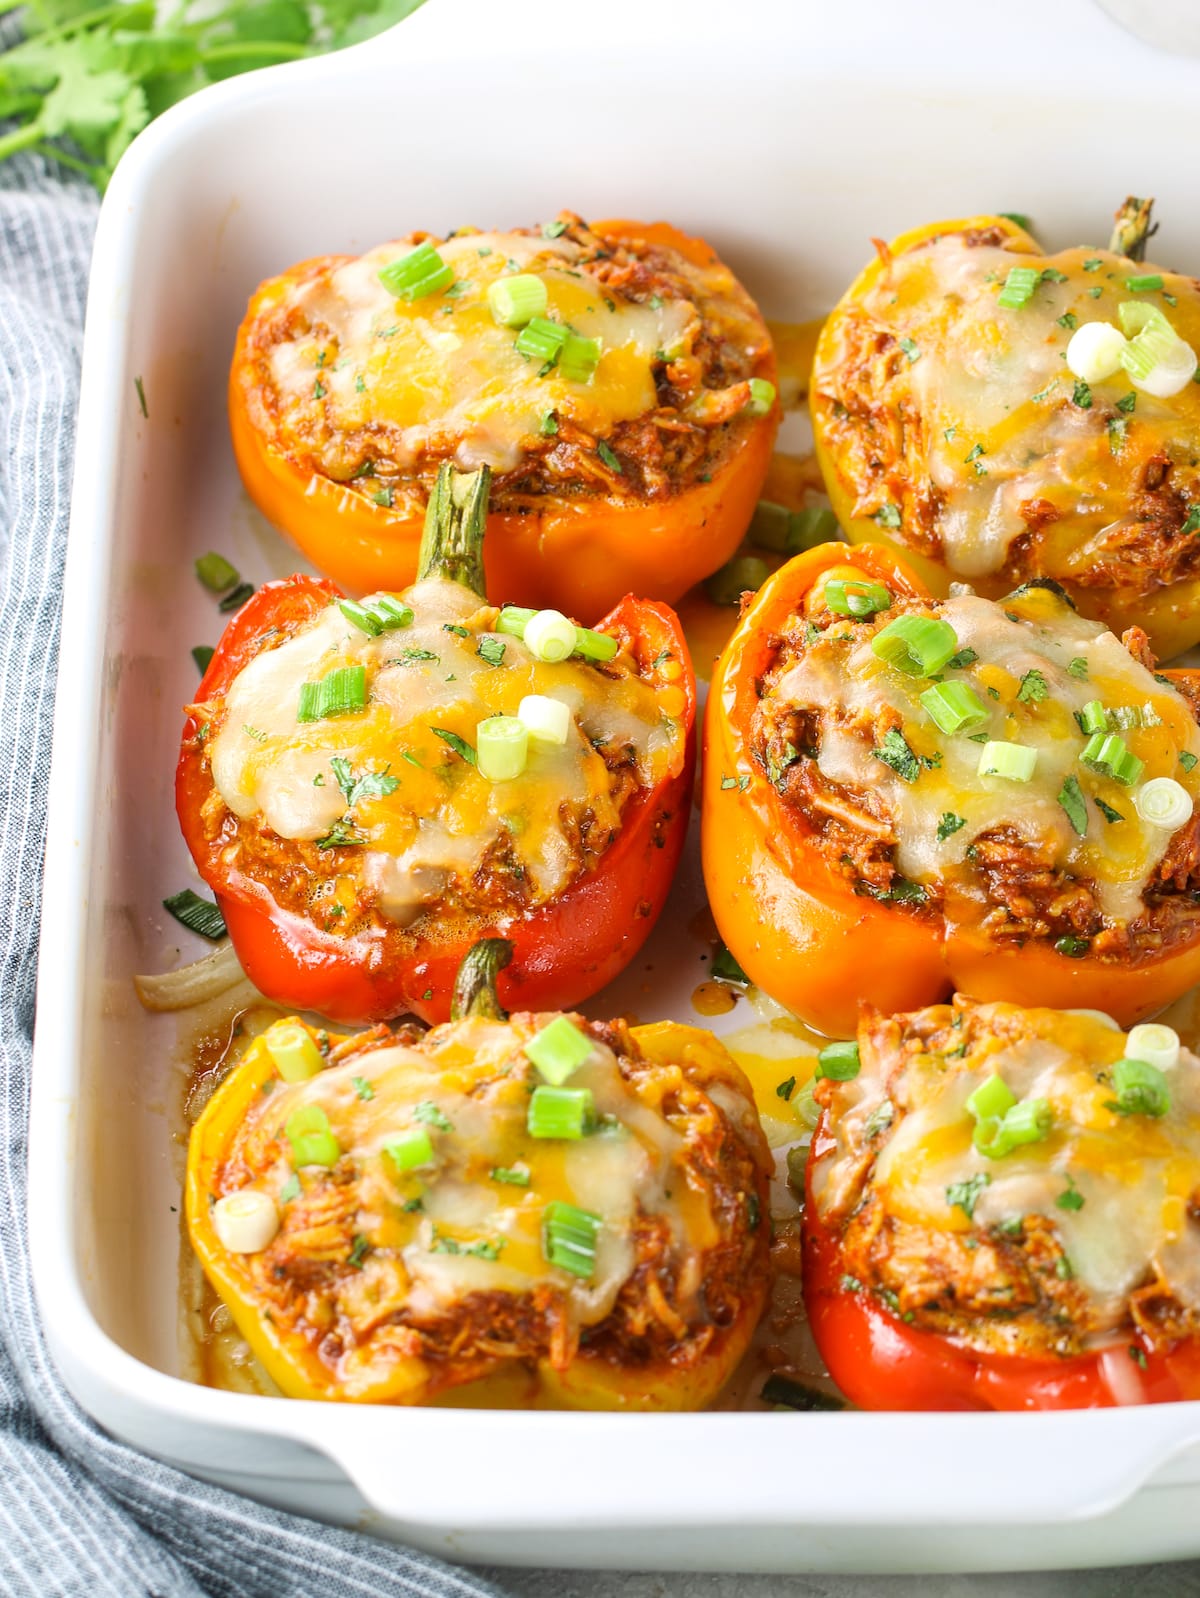 Mexican peppers cooked in a casserole dish.